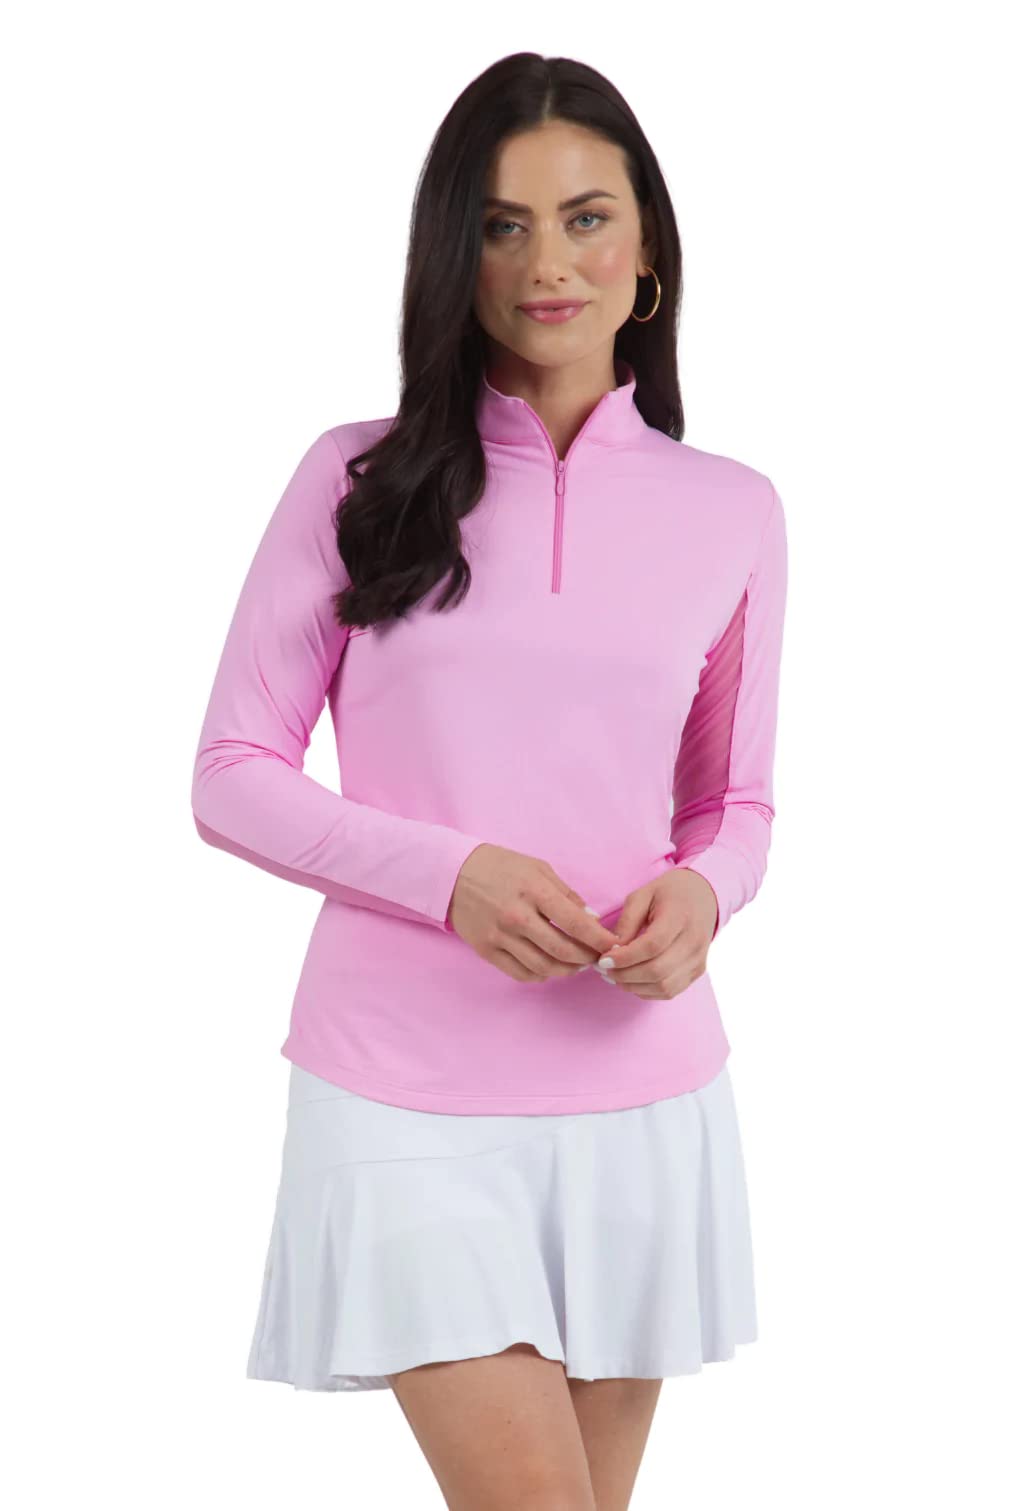 IBKUL Athleisure Wear Sun Protective UPF 50+ Icefil Cooling Tech Long Sleeve Mock Neck Top with Under Arm Mesh 80000 Plum Solid XS